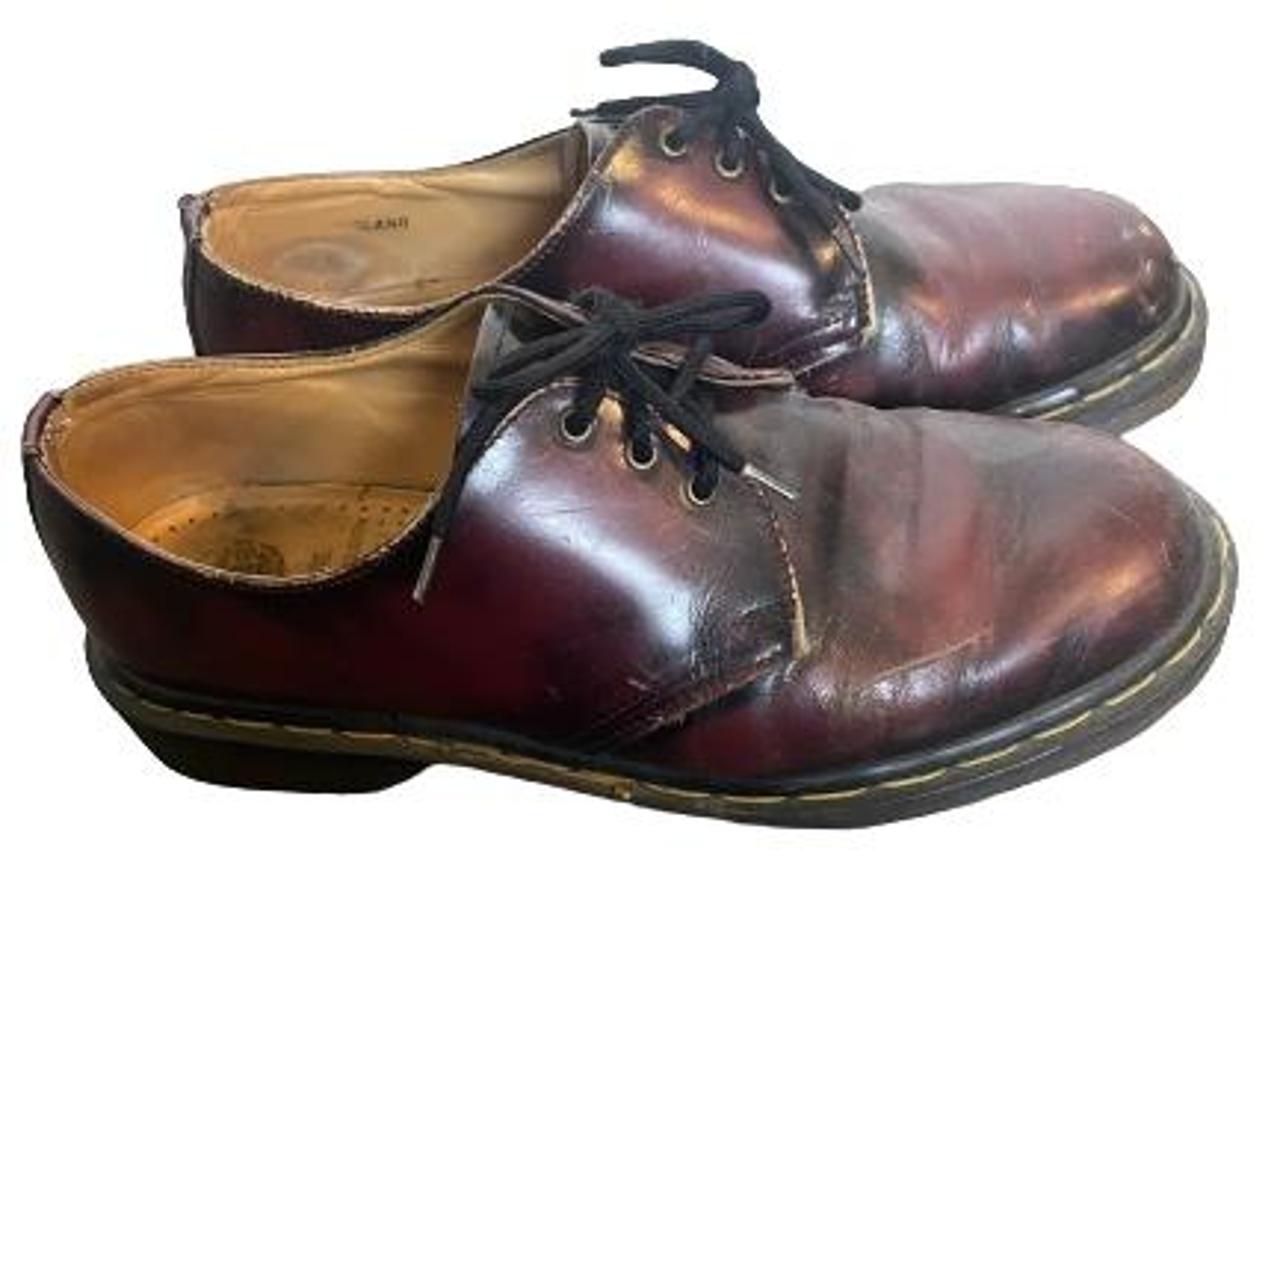 Dr. Martens Men's Burgundy and Black Trainers (2)